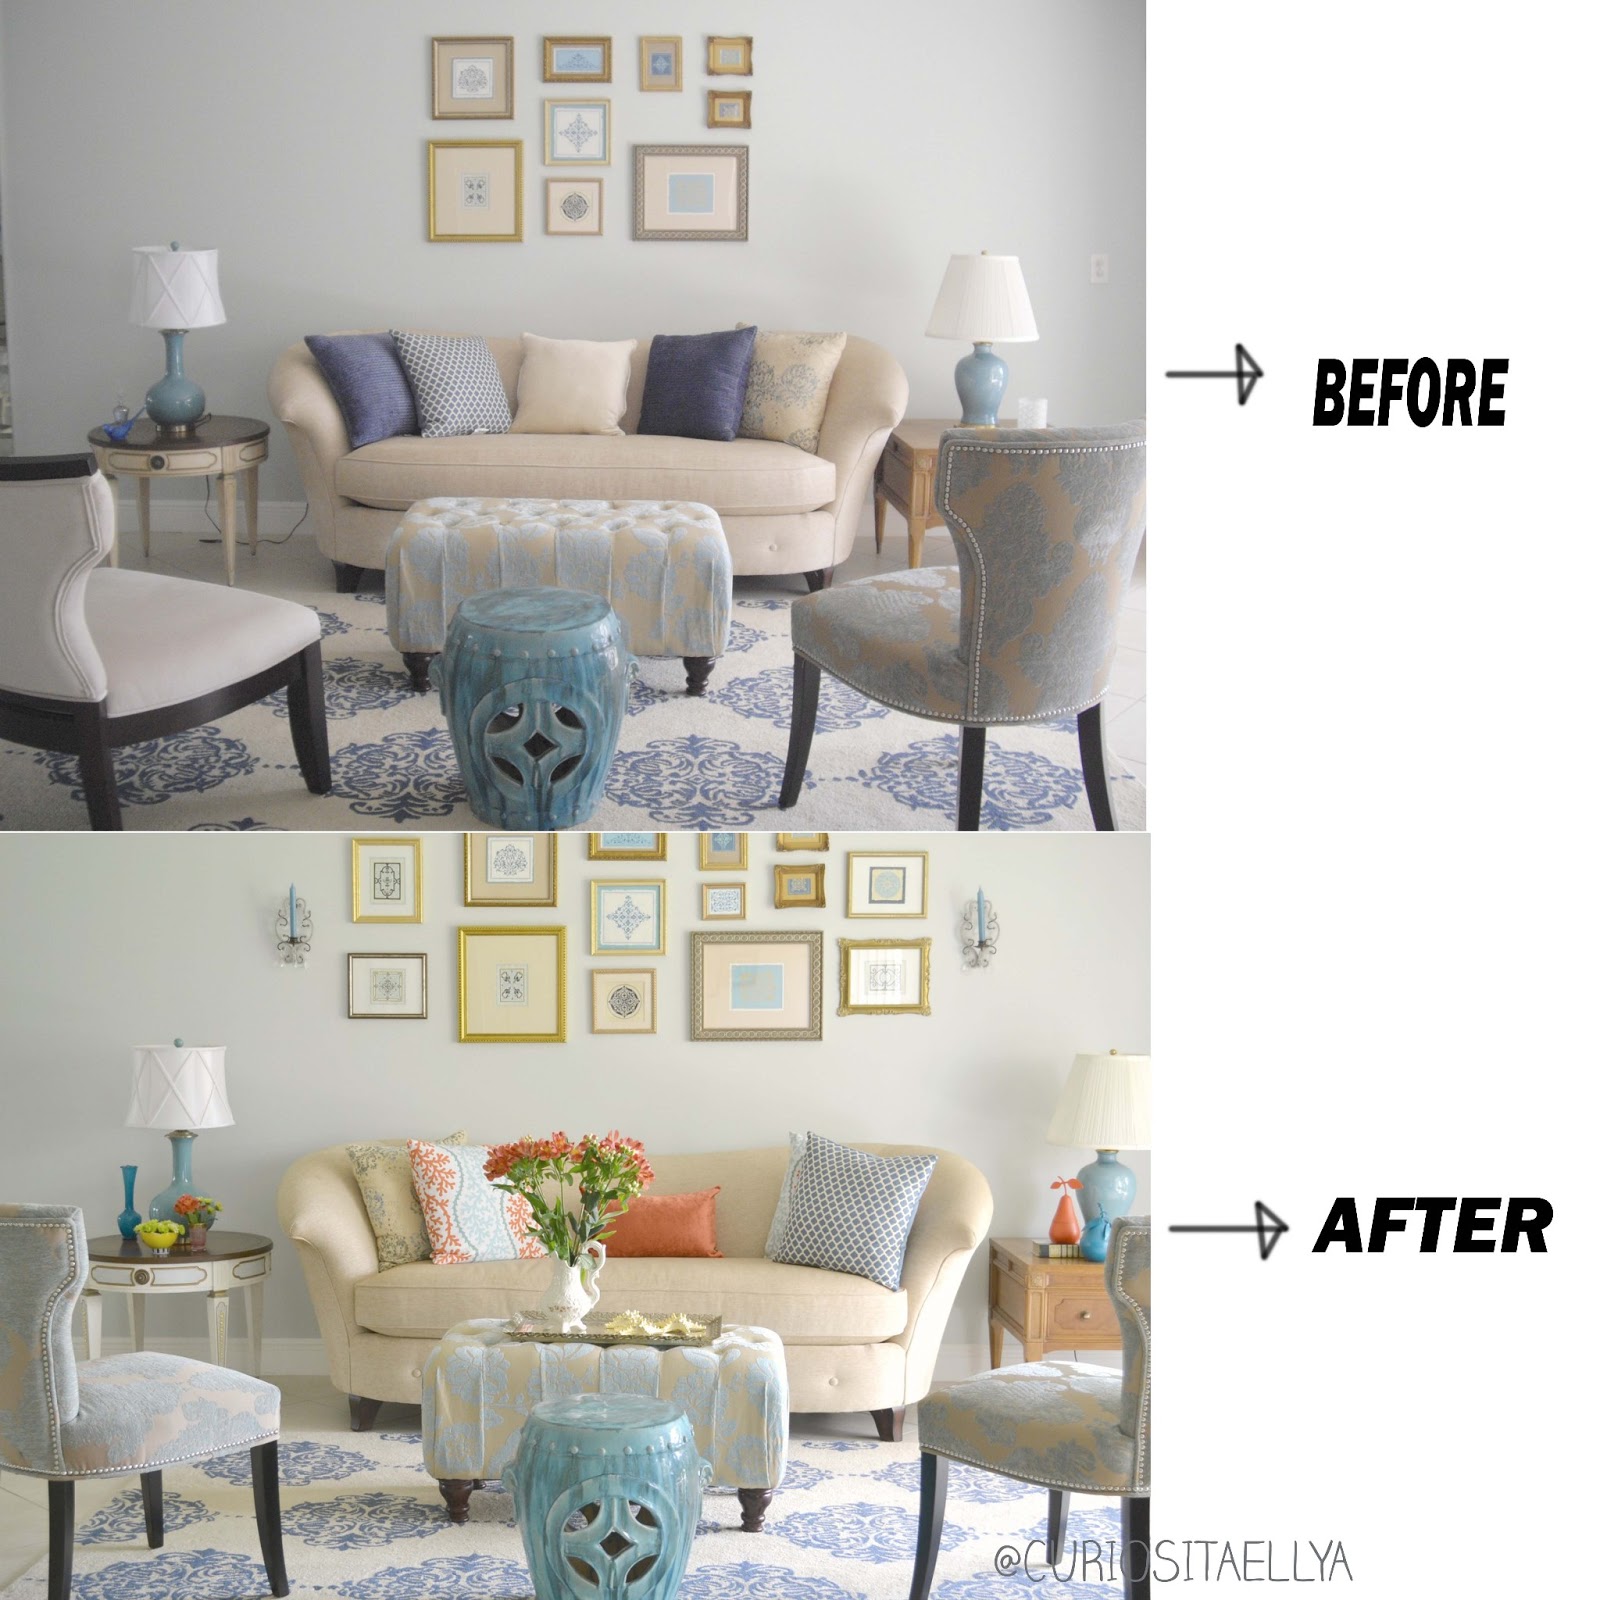 Curiositaellya: Soft Blue and Linen End Table Makeover